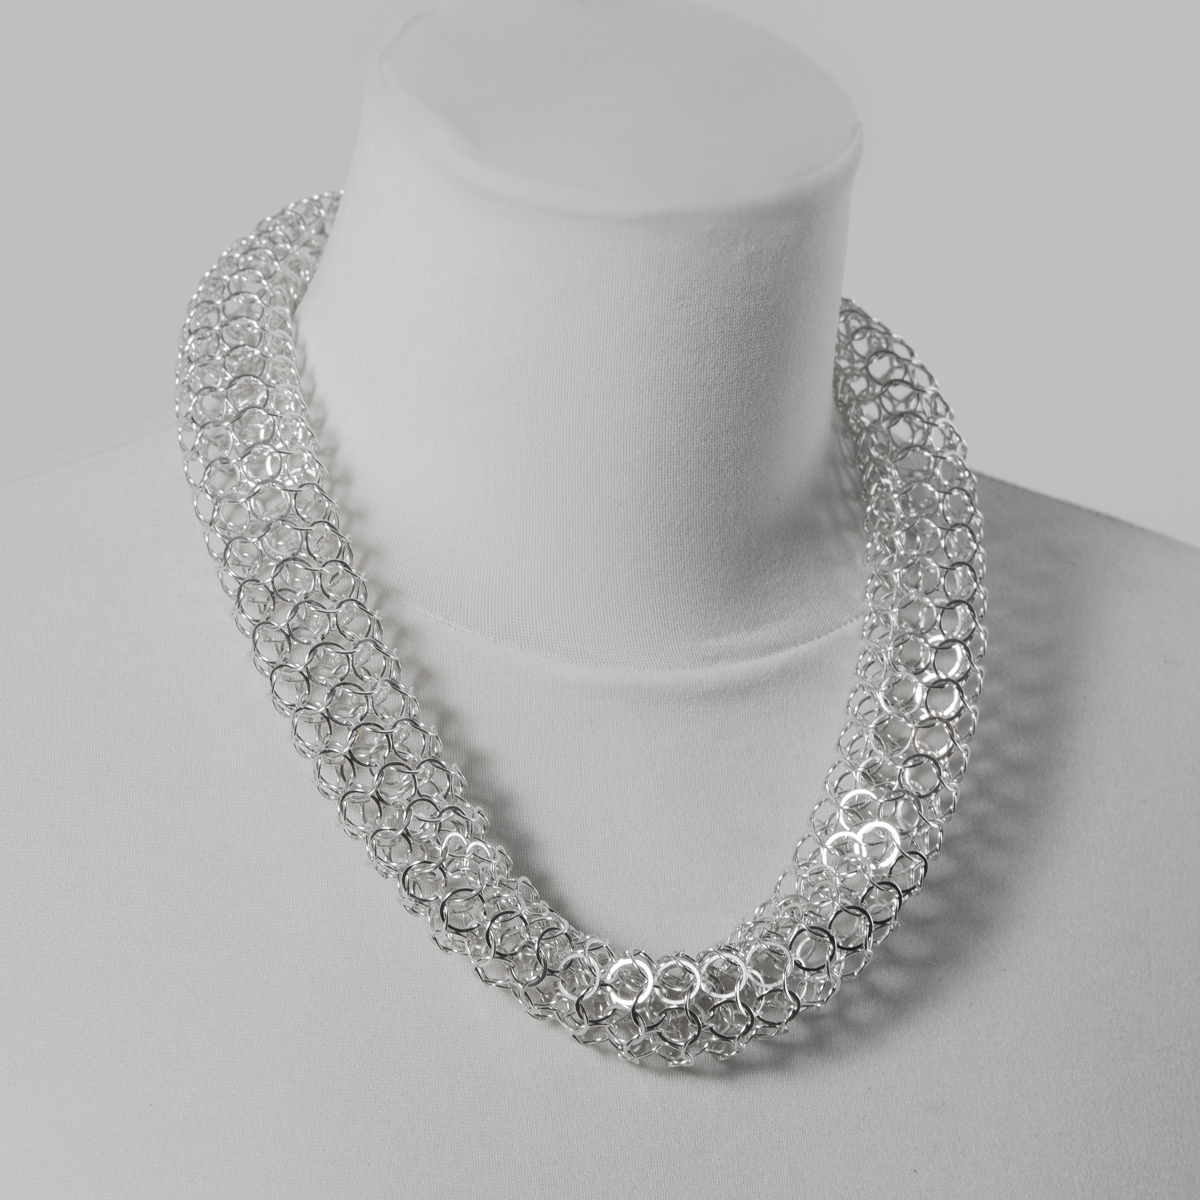 Jarvie chain tube necklace | Necklaces / Pendants by Joanne Thompson